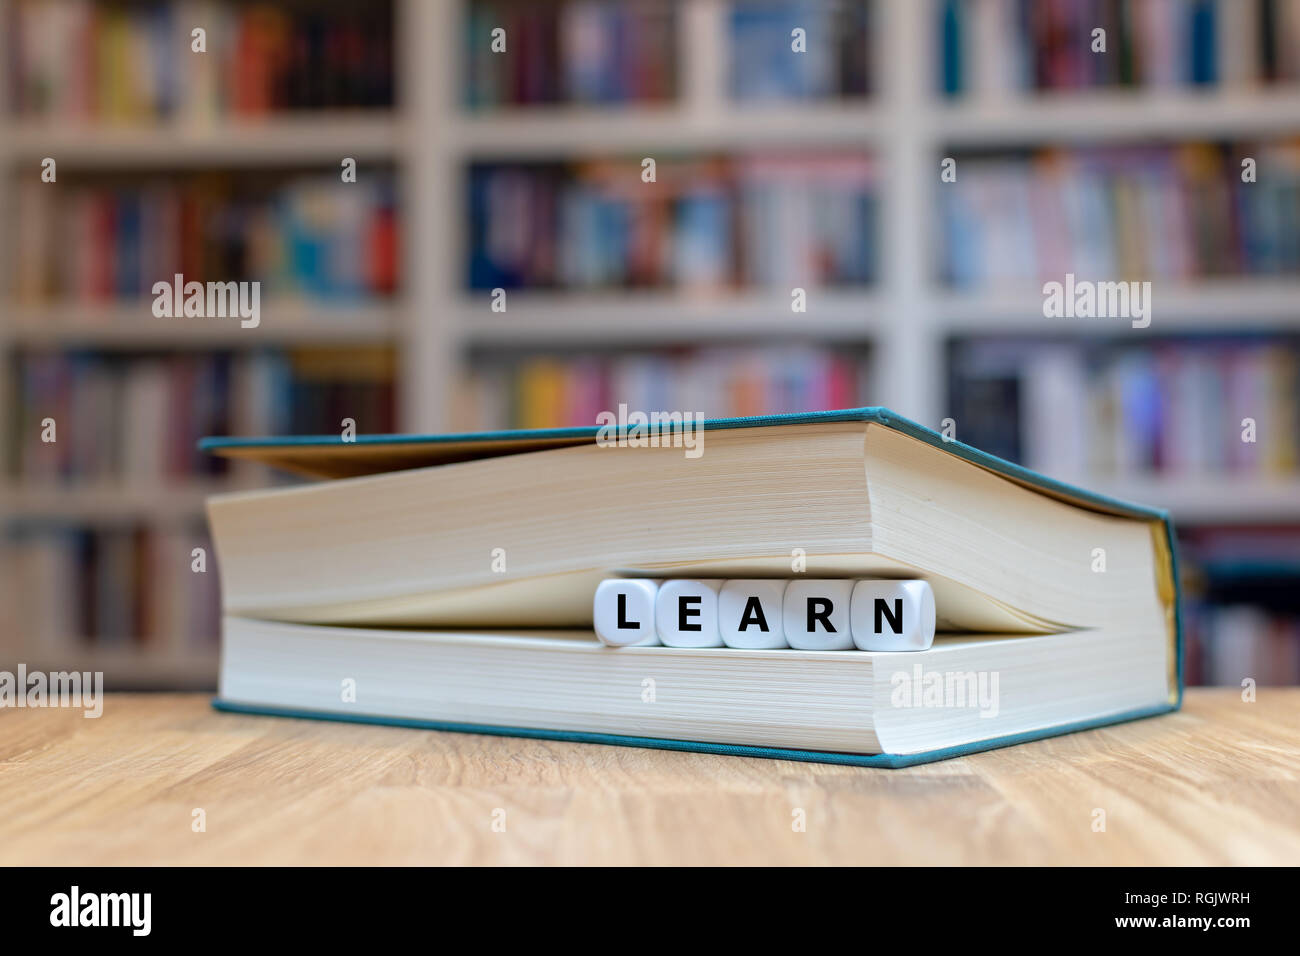 Dice in a book form the word 'LEARN'. Book is lying on a wooden table in a library. Stock Photo